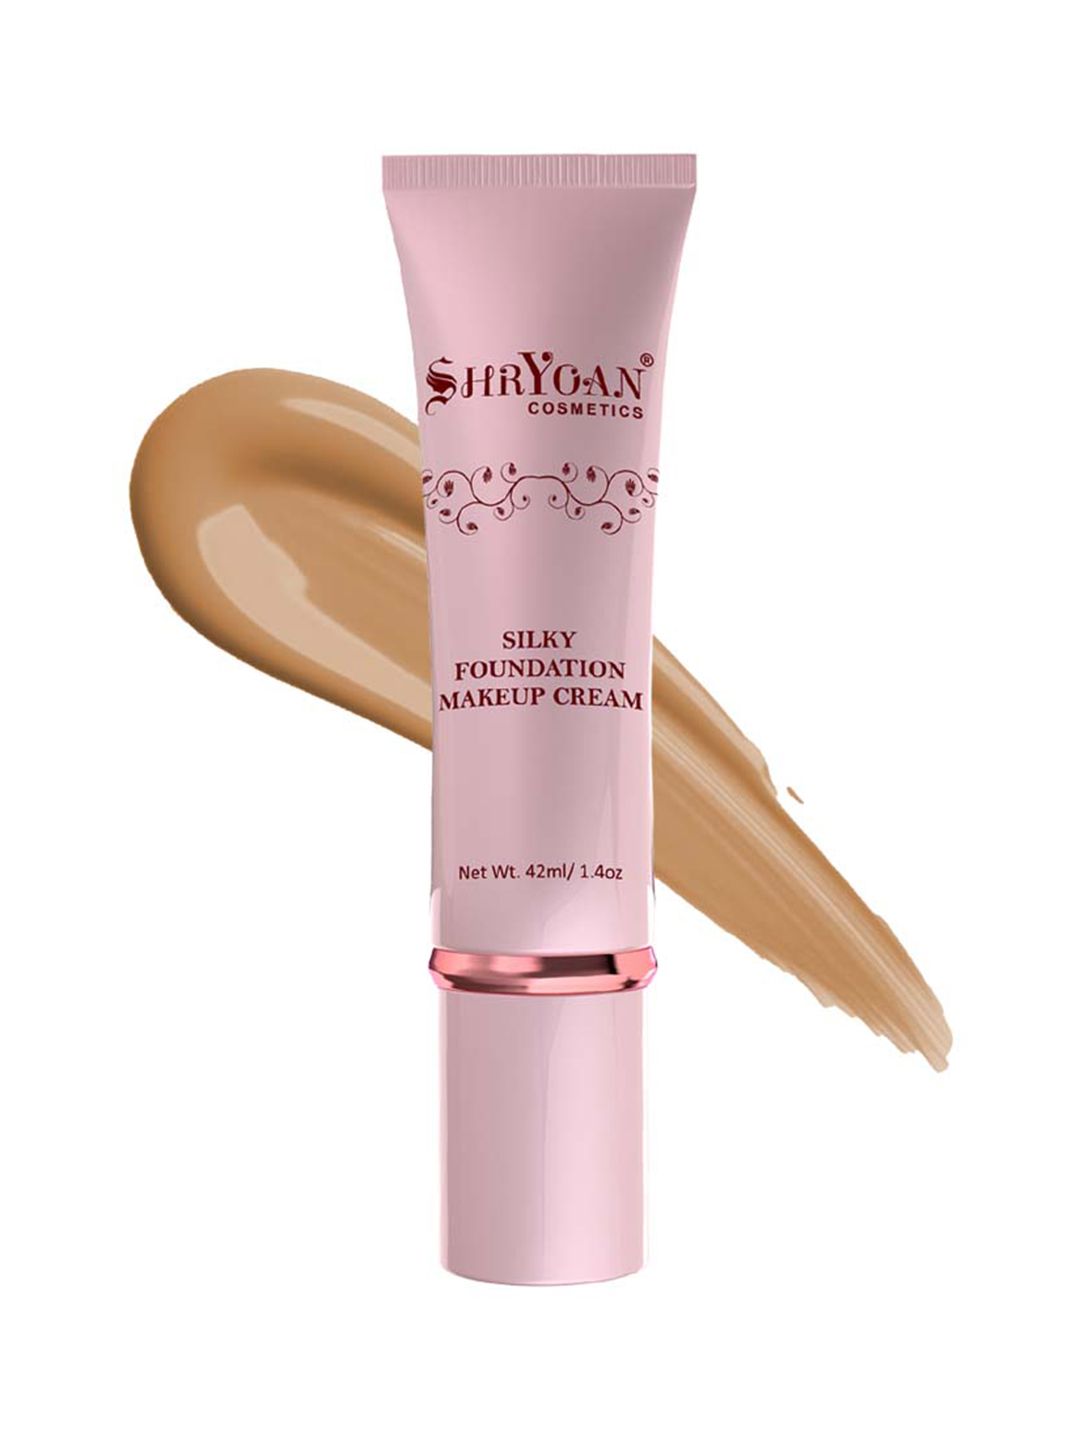 SHRYOAN Silky Foundation Make-Up Cream - Beige 42 ml Price in India